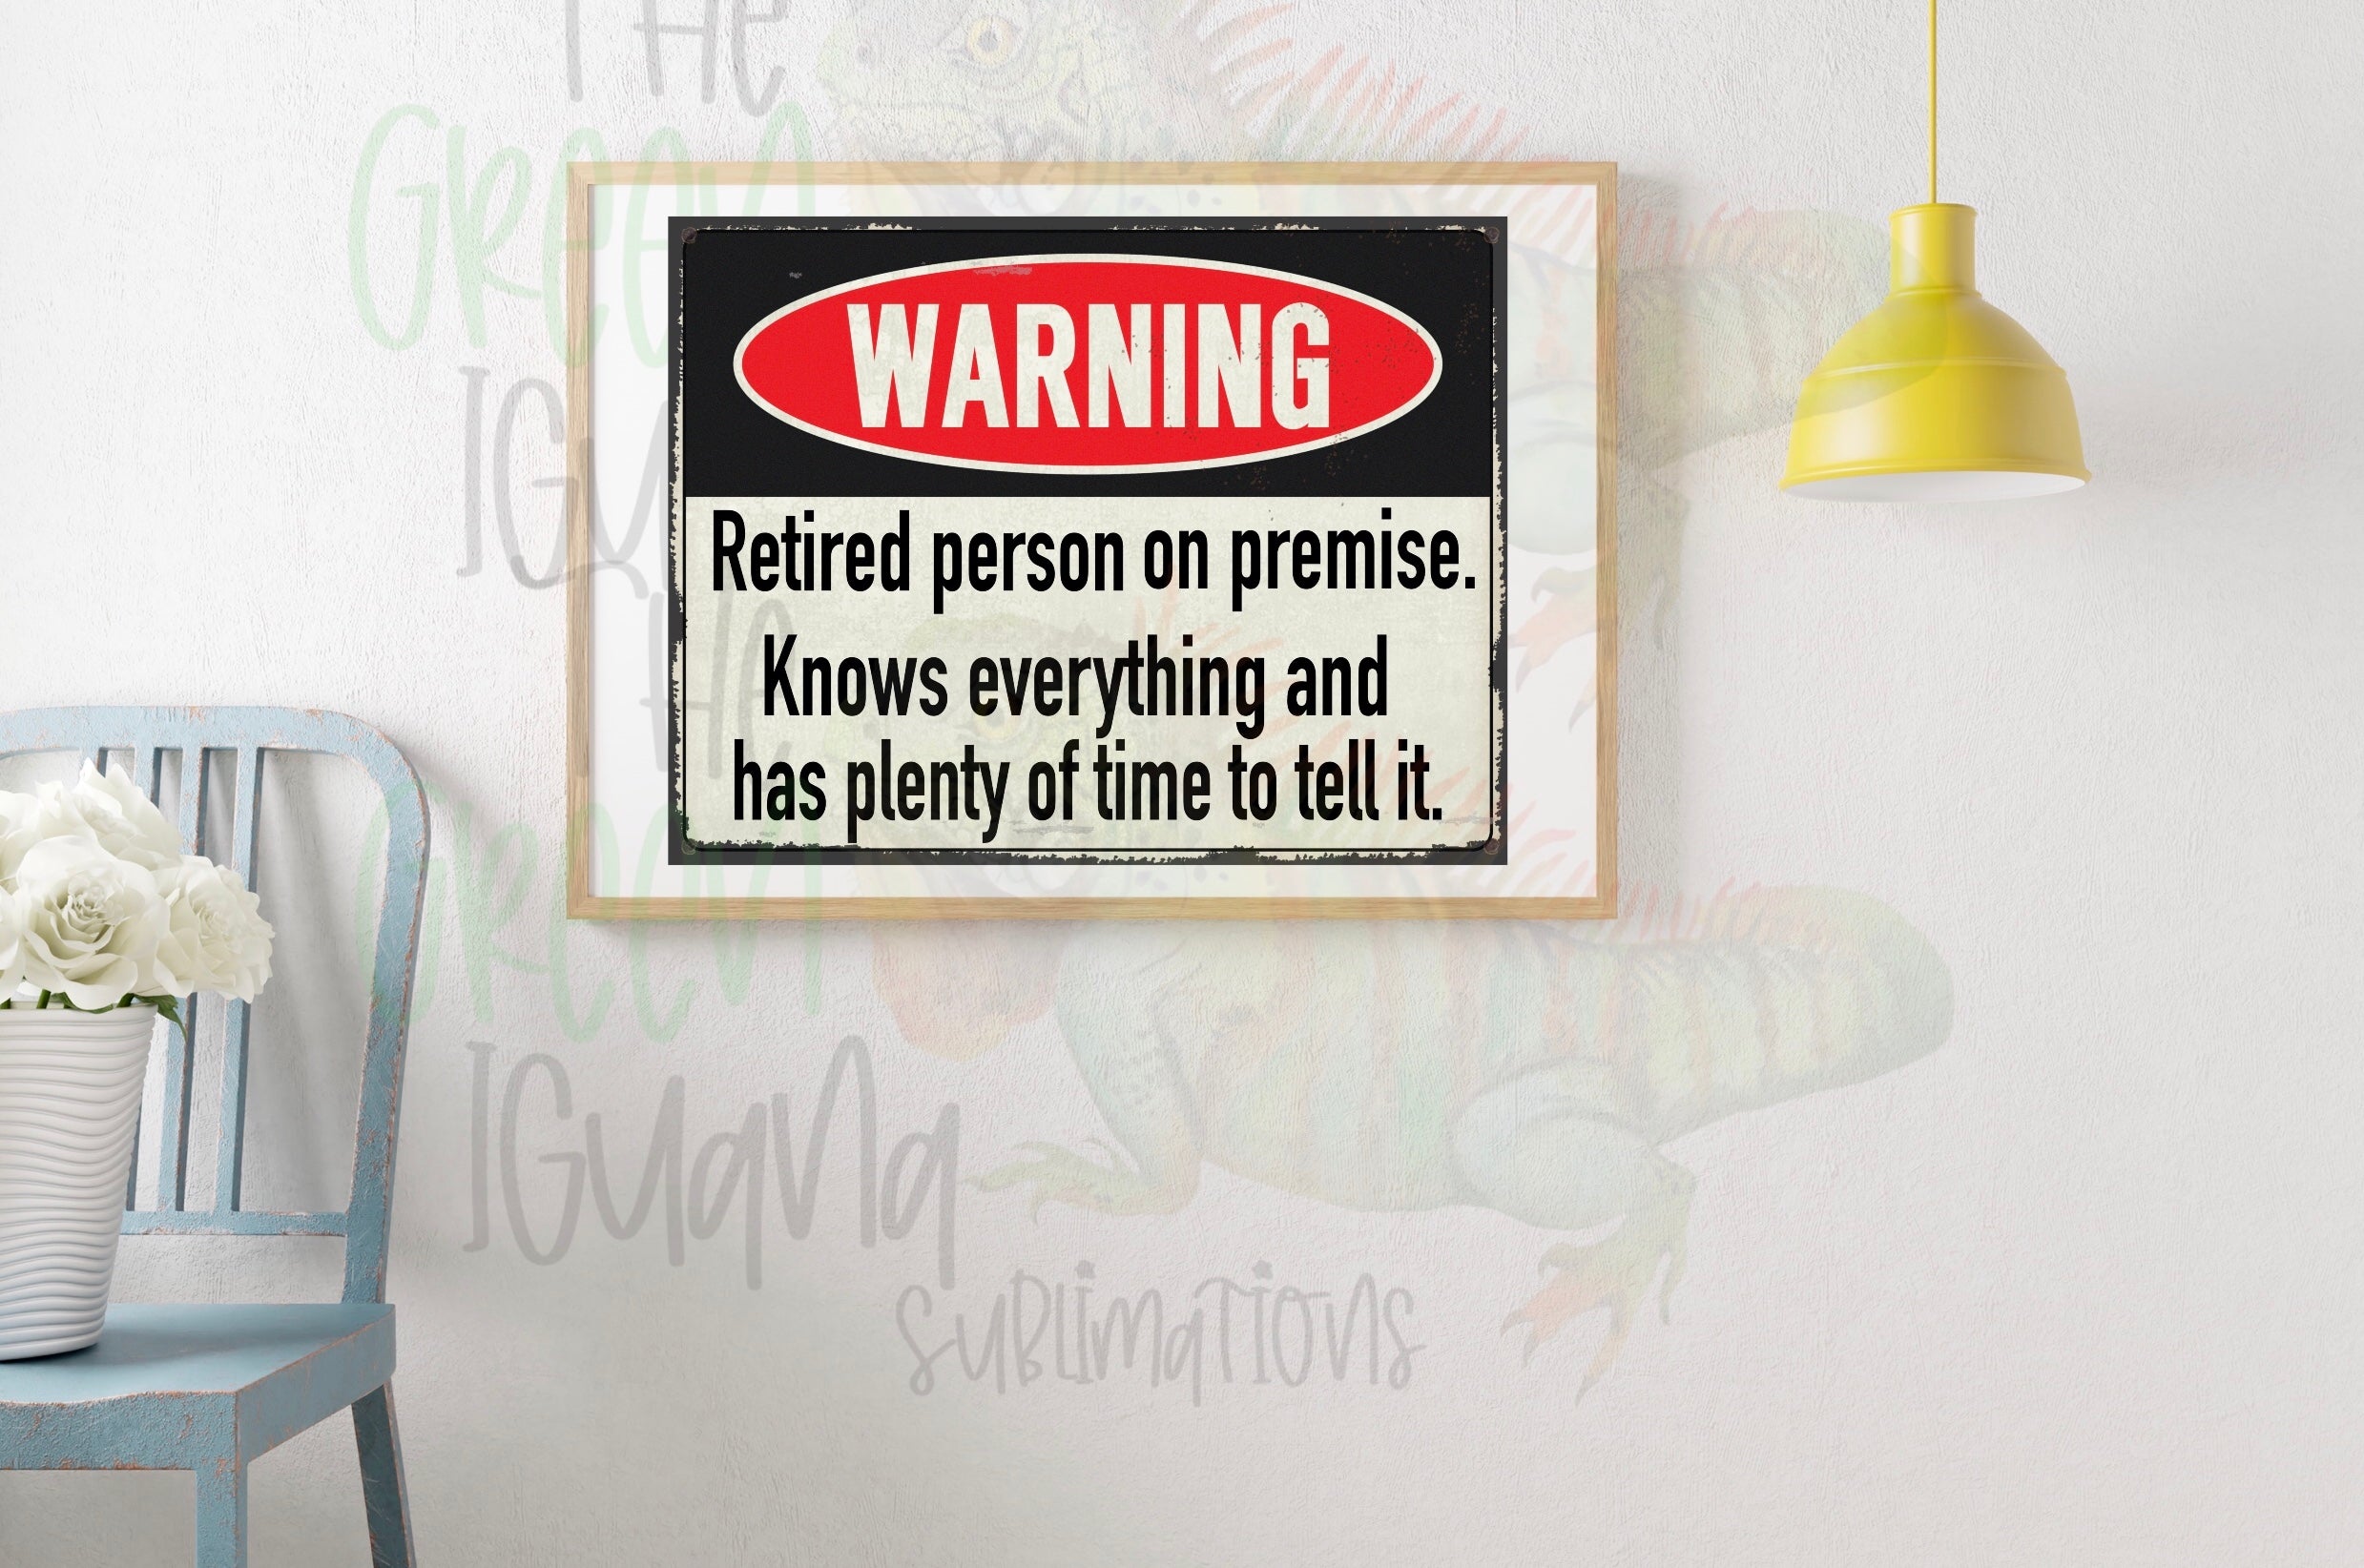 Warning - retired person on premise